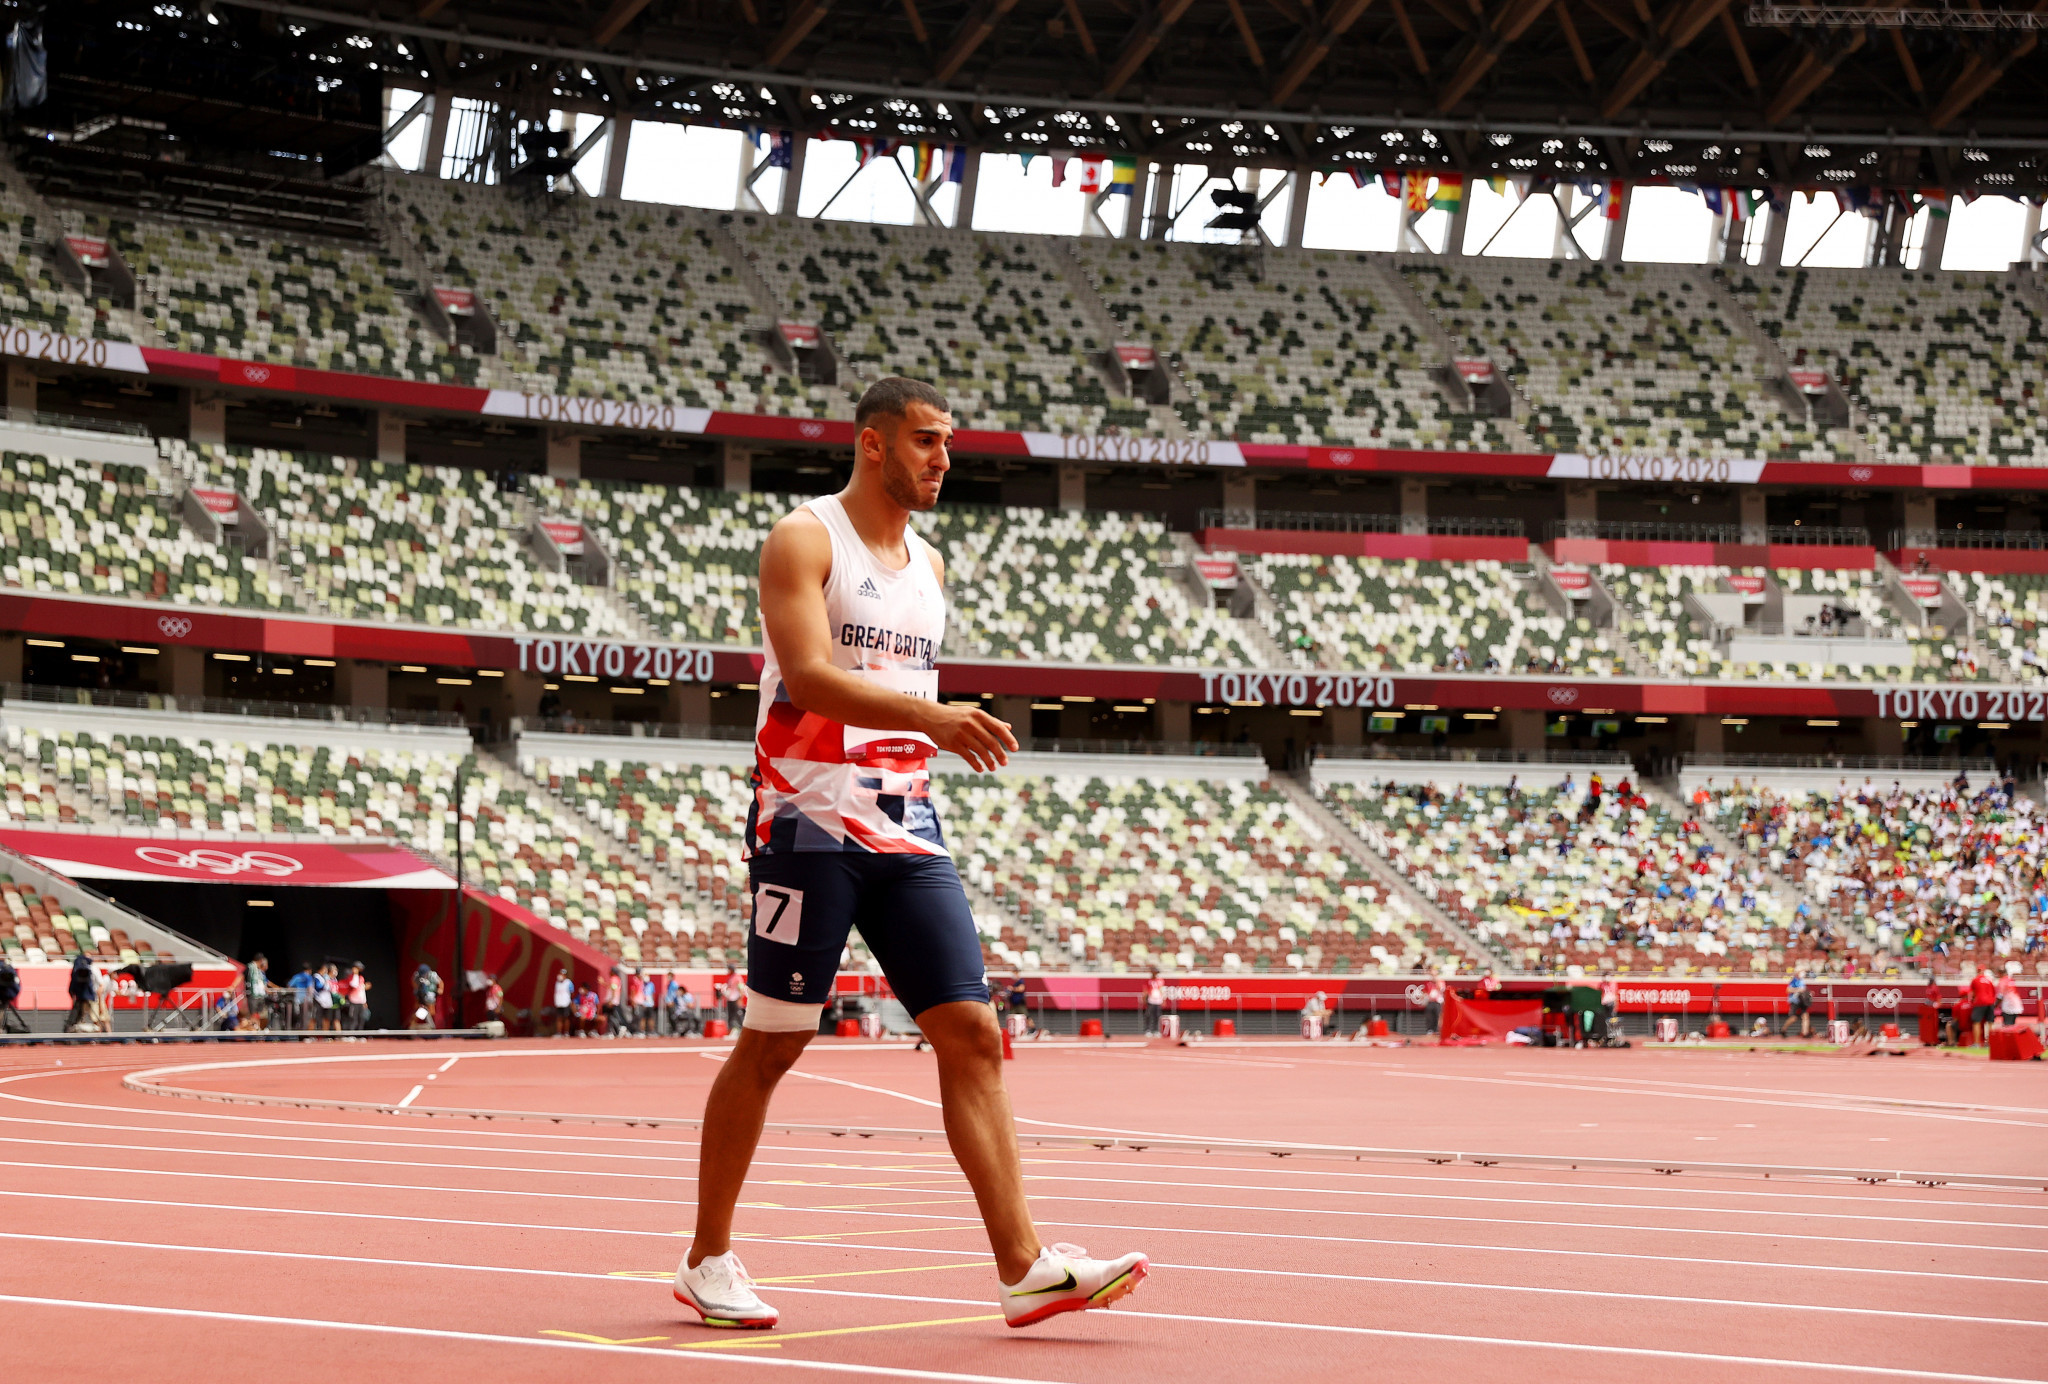 Adam Gemili, who pulled up injured at the Tokyo 2020 Olympics, has been instructed to cease contact with Reider by UK Athletics ©Getty Images